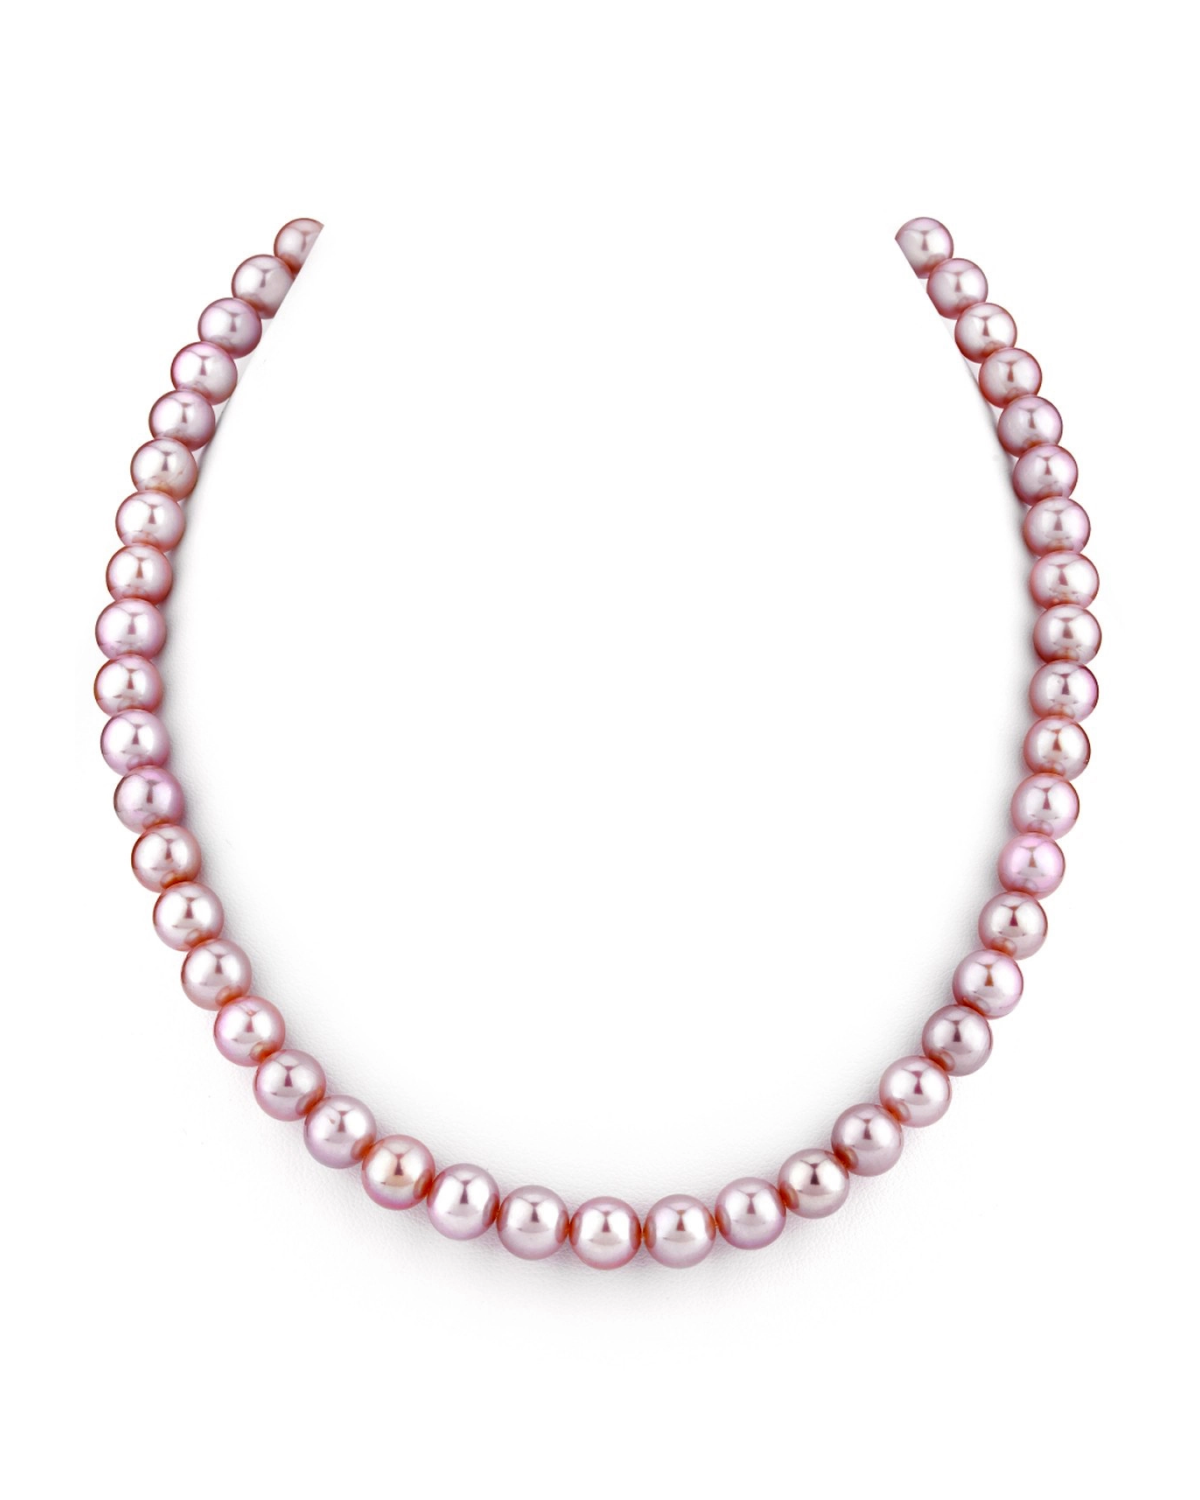 7.0-7.5mm Pink Freshwater Pearl Necklace - AAA Quality